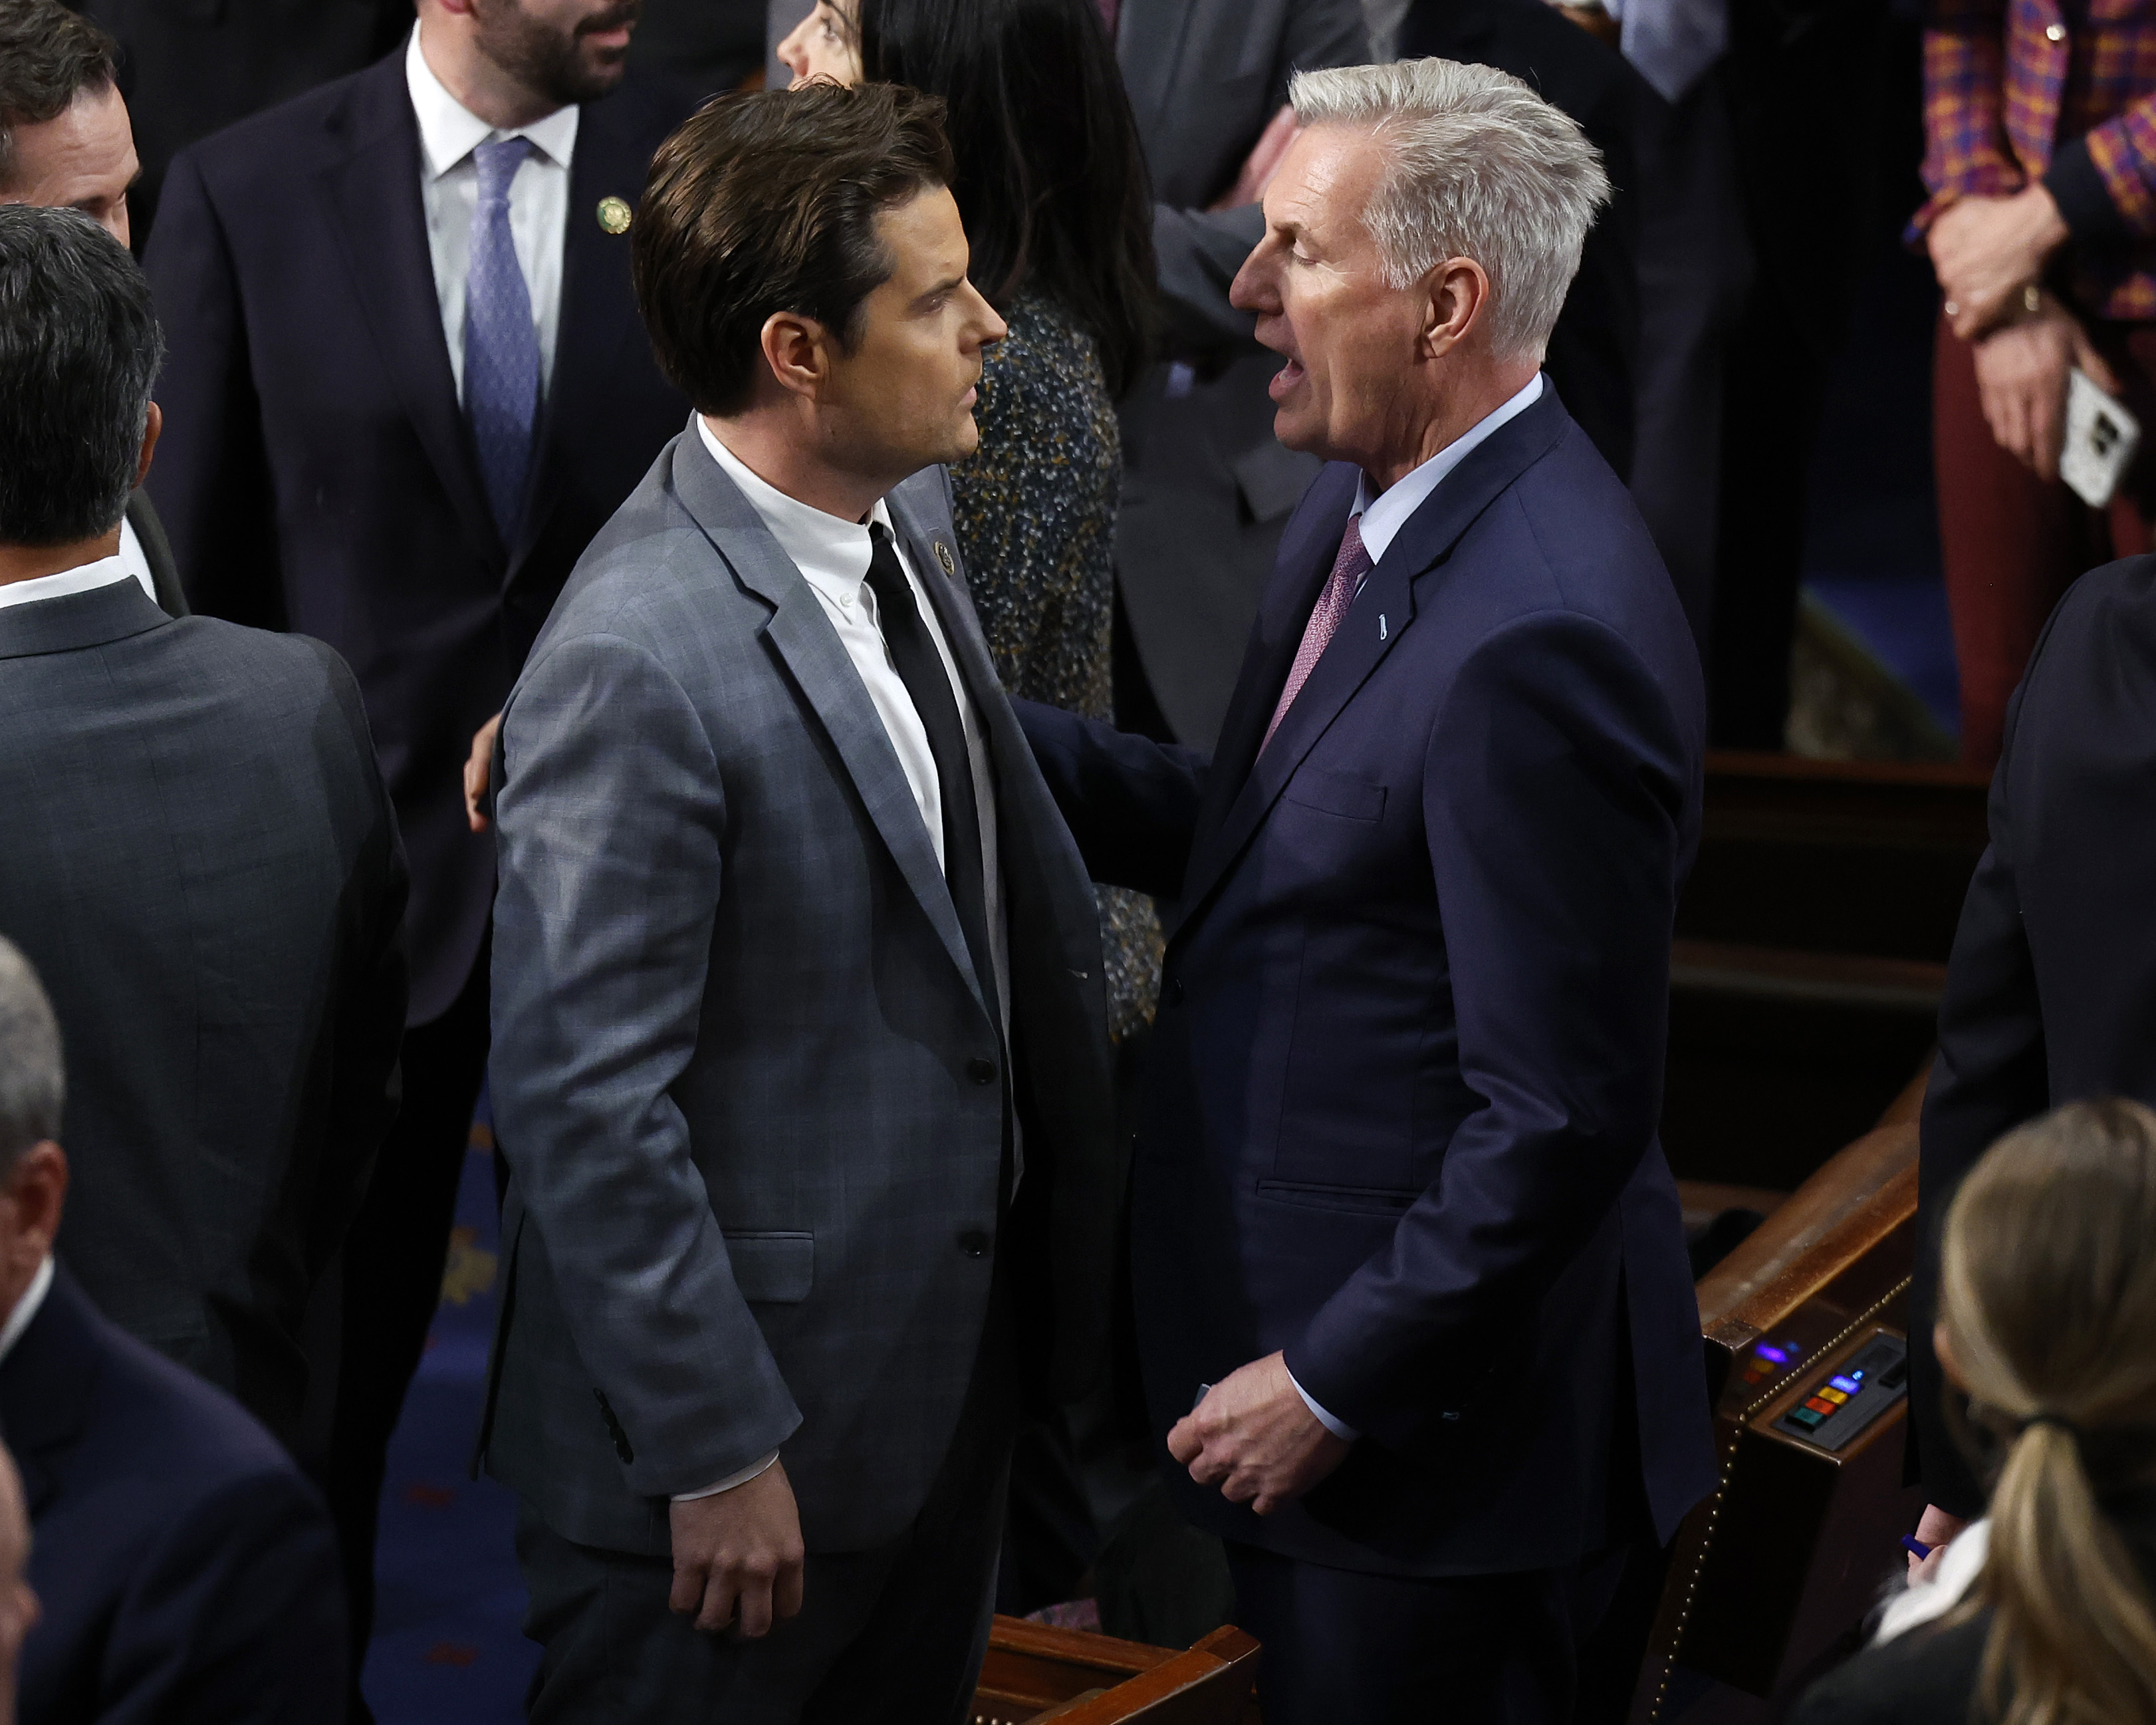 Kevin McCarthy, right, in a blue suit, speaks with Matt Gaetz, left, in a gray suit, surrounded by others on the House floor.